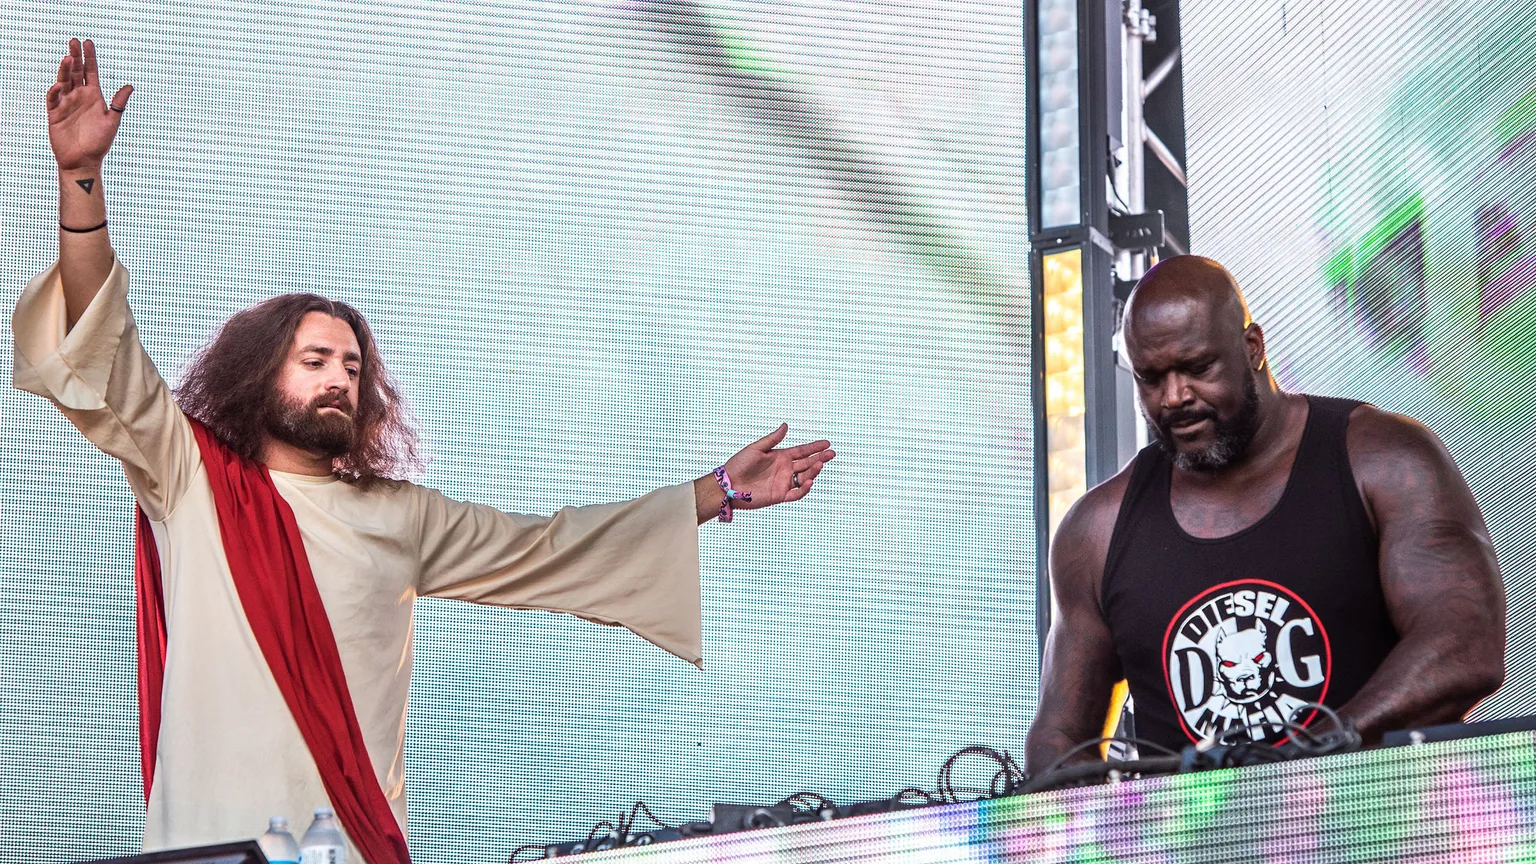 Shaq aka Diesel performs with a Jesus impersonator at Lollapalooza in Grant Park, Chicago in 2019. Image: Ted Alexander Somerville/Shutterstock